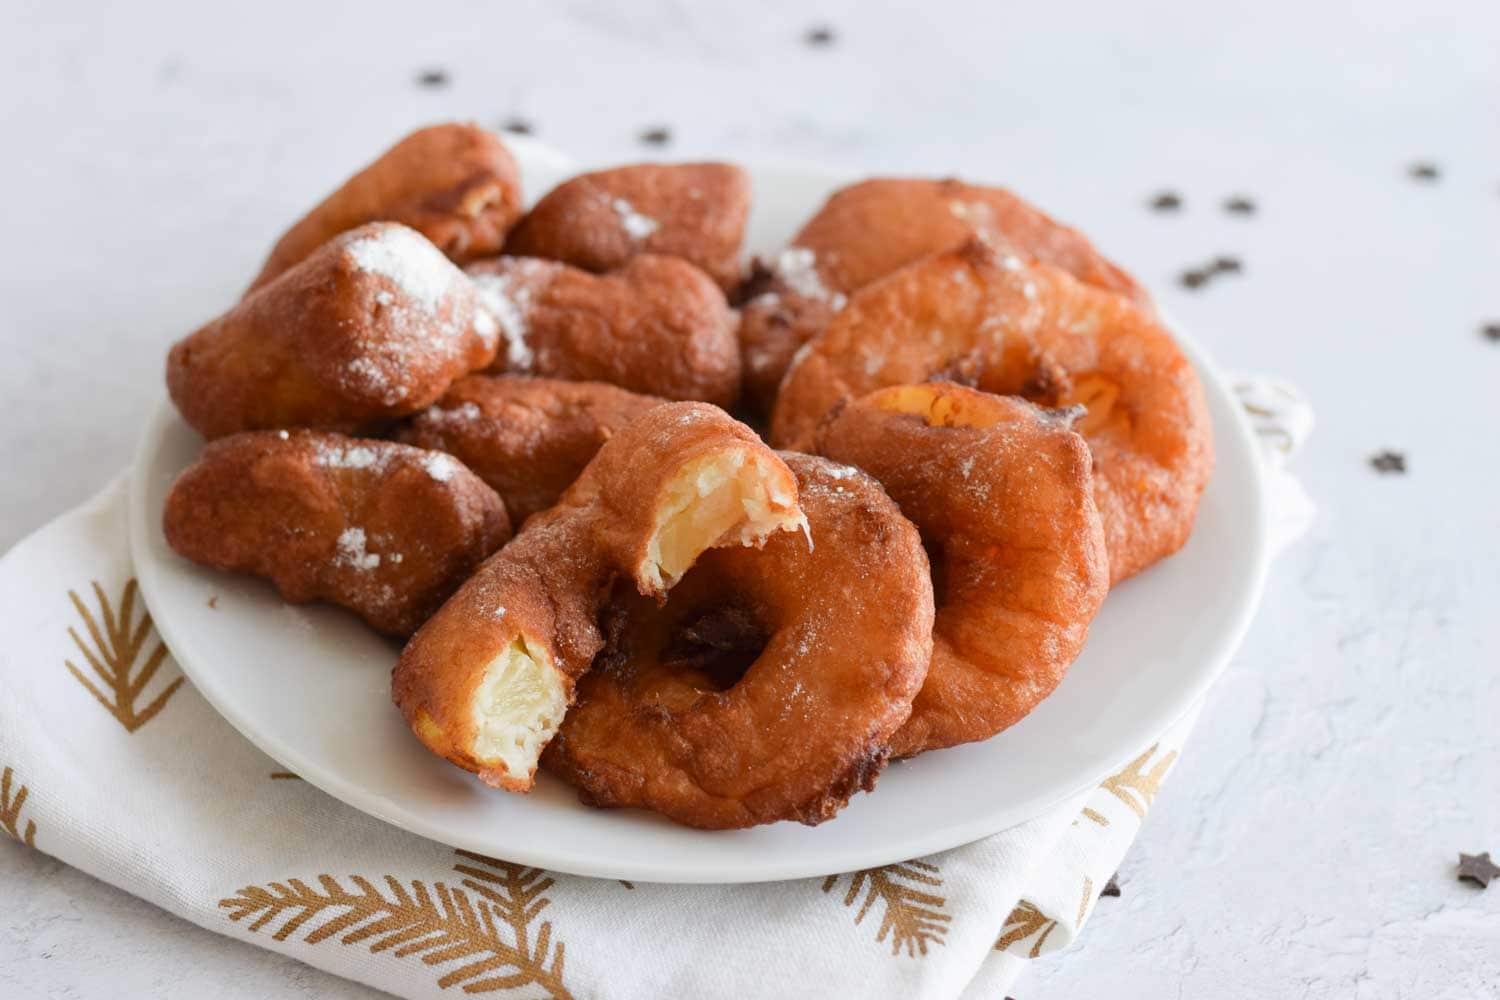 Low FODMAP pineapple and banana beignets